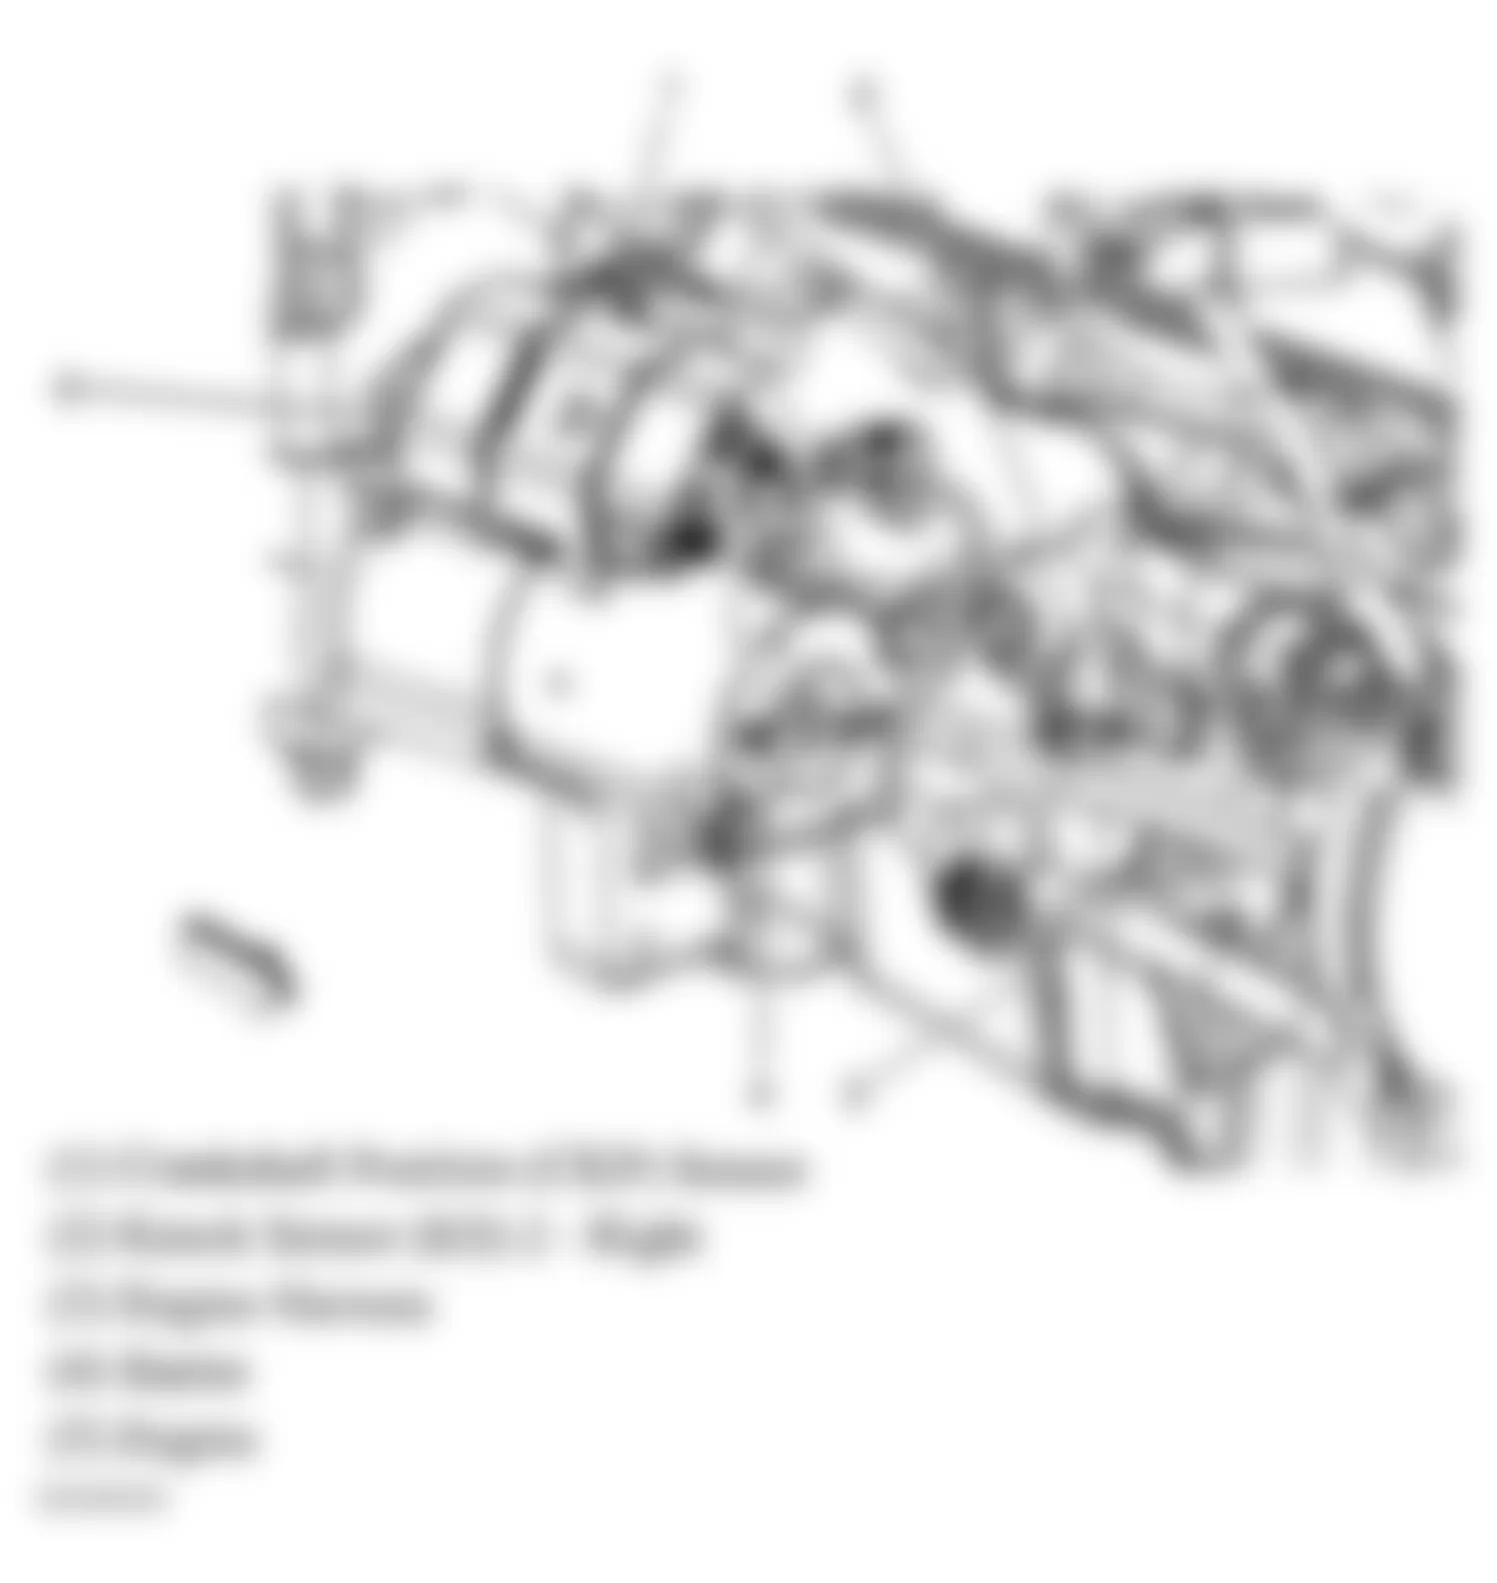 GMC Envoy 2008 - Component Locations -  Lower Right Rear Of Engine (5.3L/6.0L)